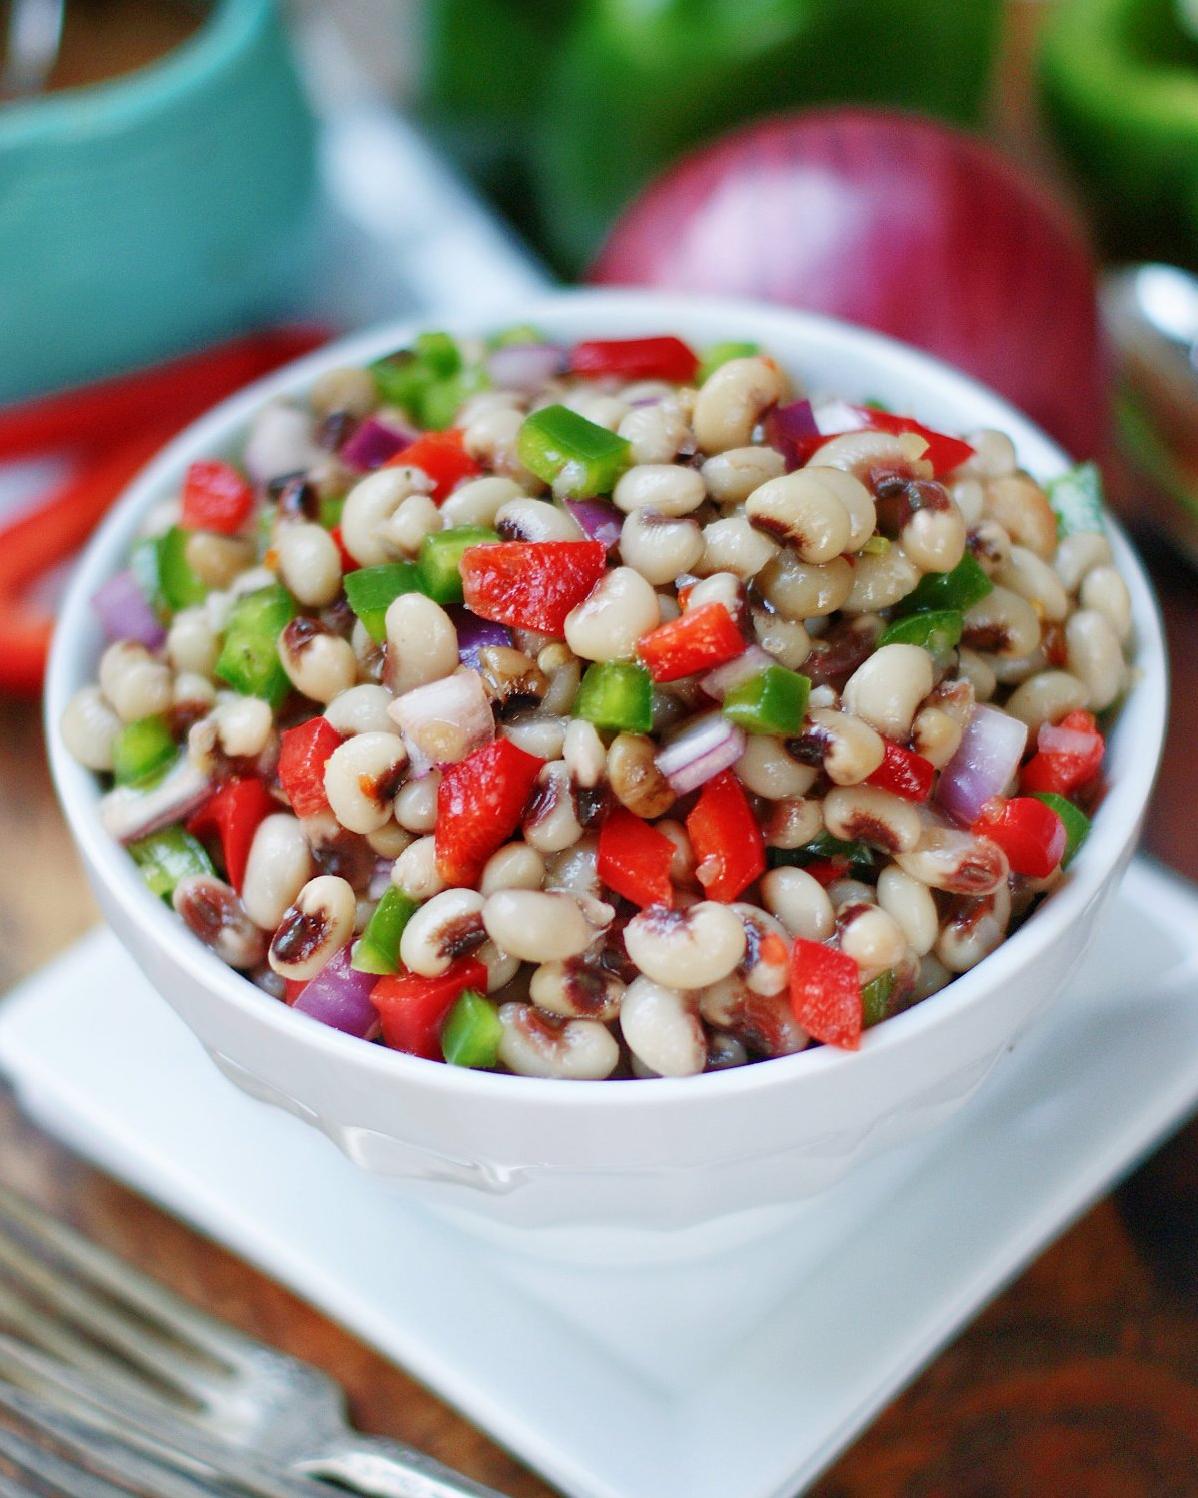  The combination of black-eyed peas, rice, and veggies is a match made in heaven.